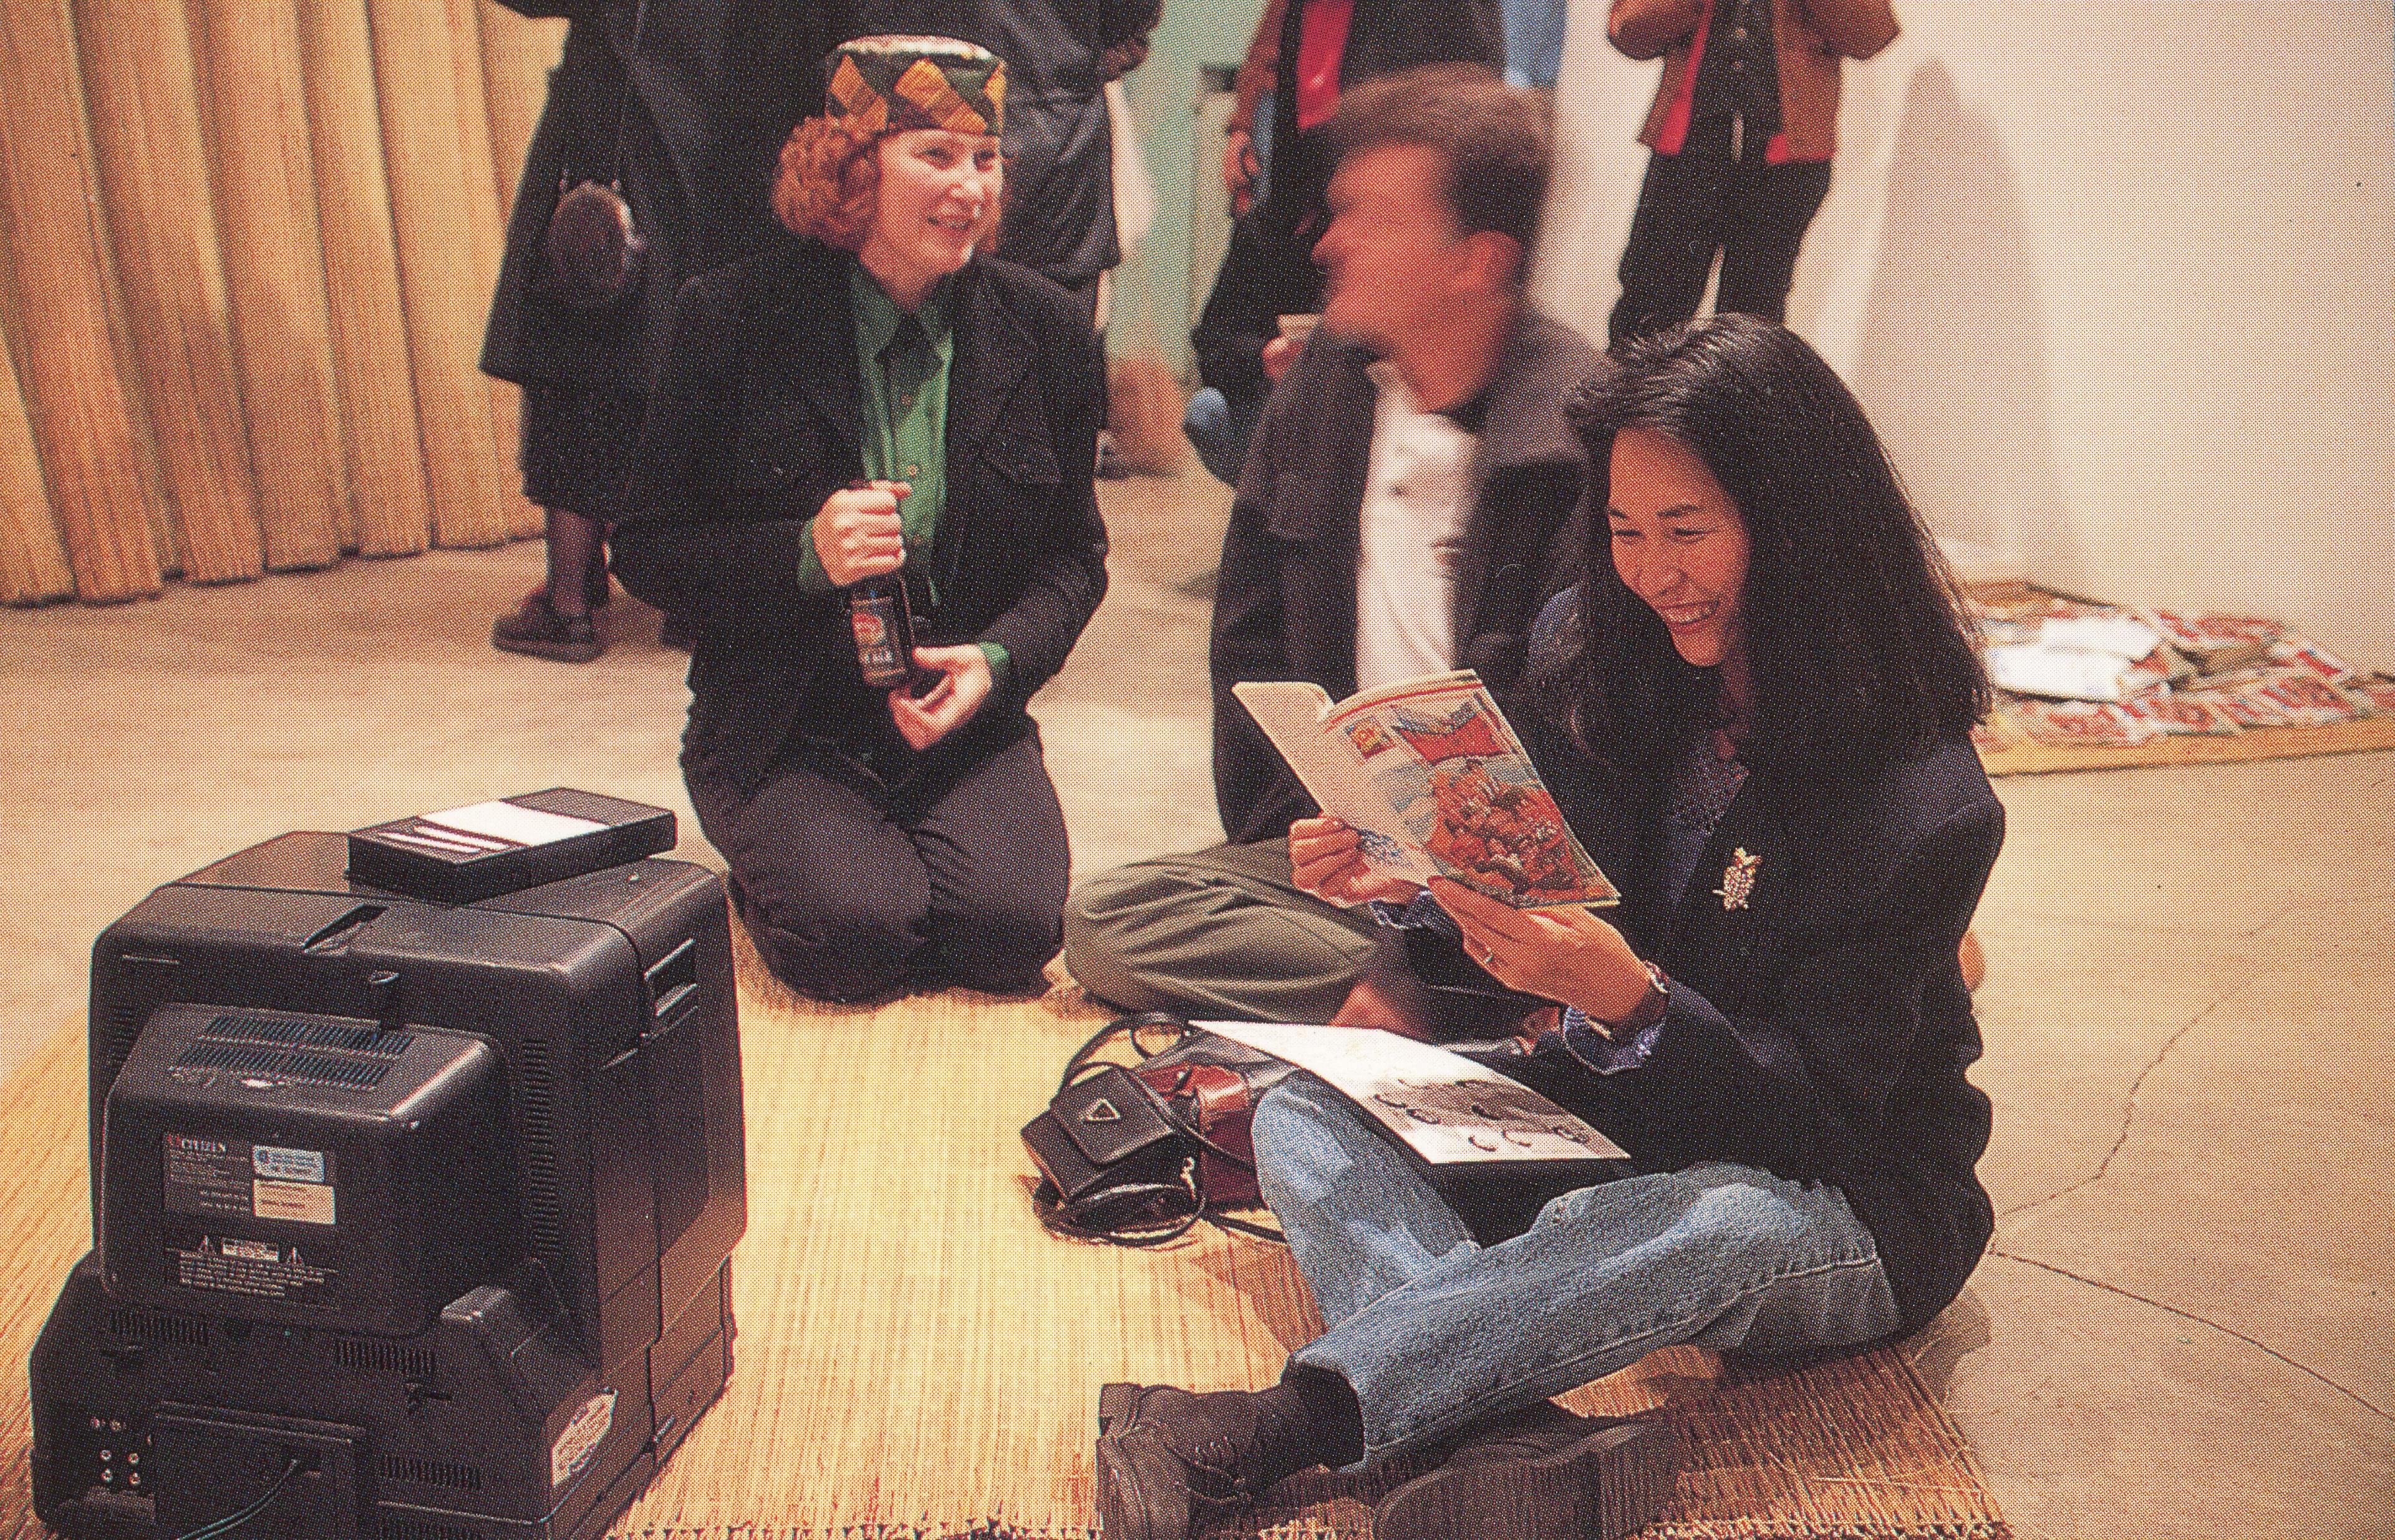 Several rush mats and a CRT TV are placed on the floor of a gallery space. A person sitting on a mat is reading a magazine made by the artist. Many more visitors are visible in the back. 